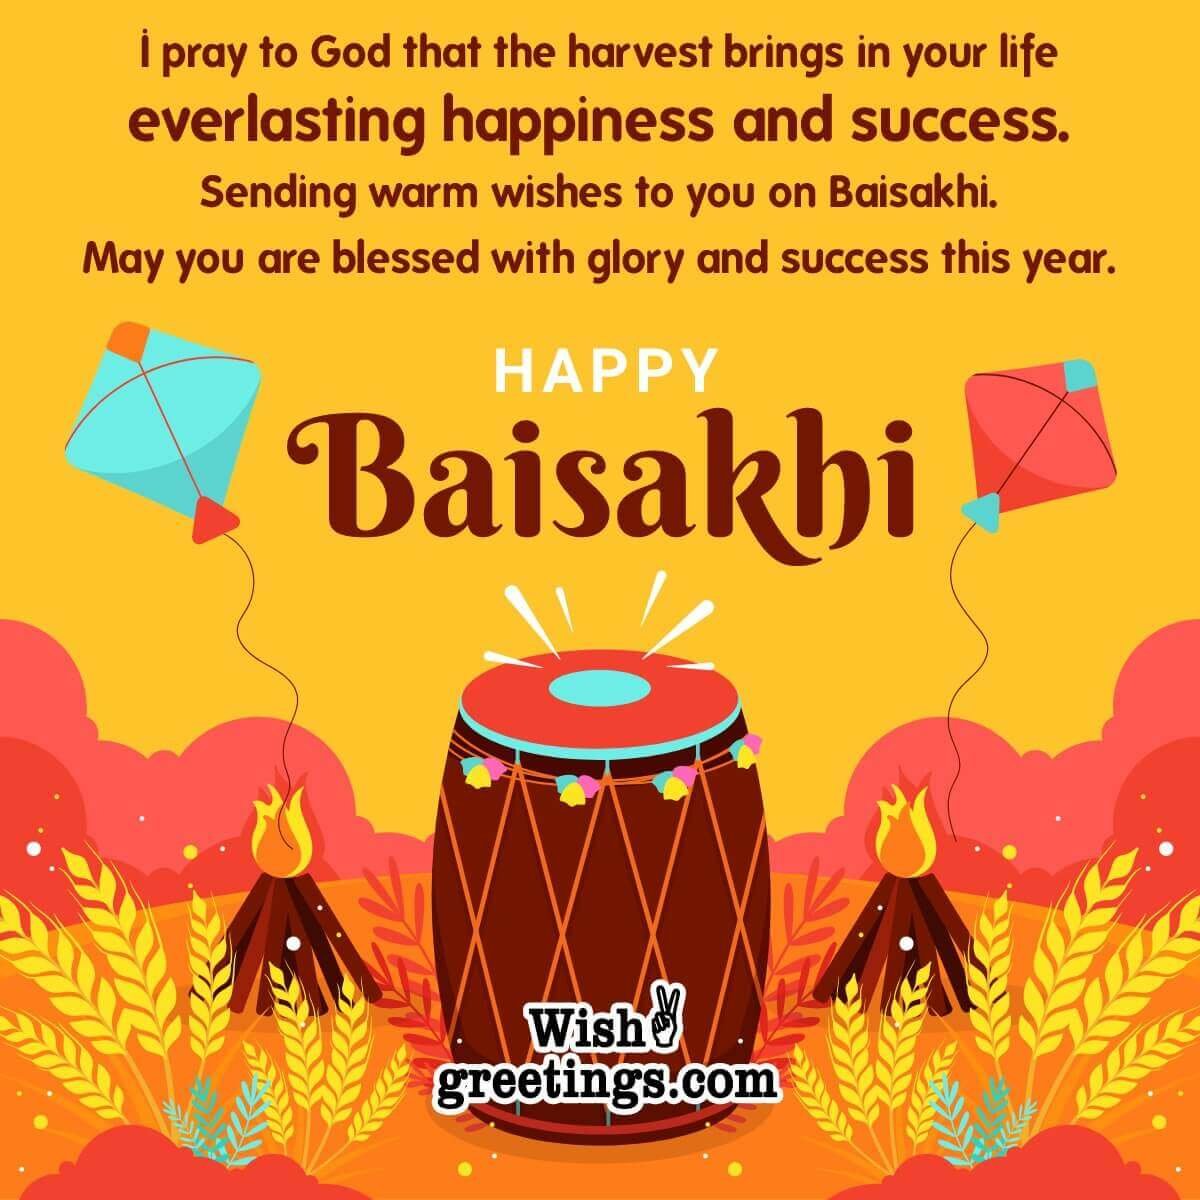 Baisakhi Wishes Messages Wish Greetings